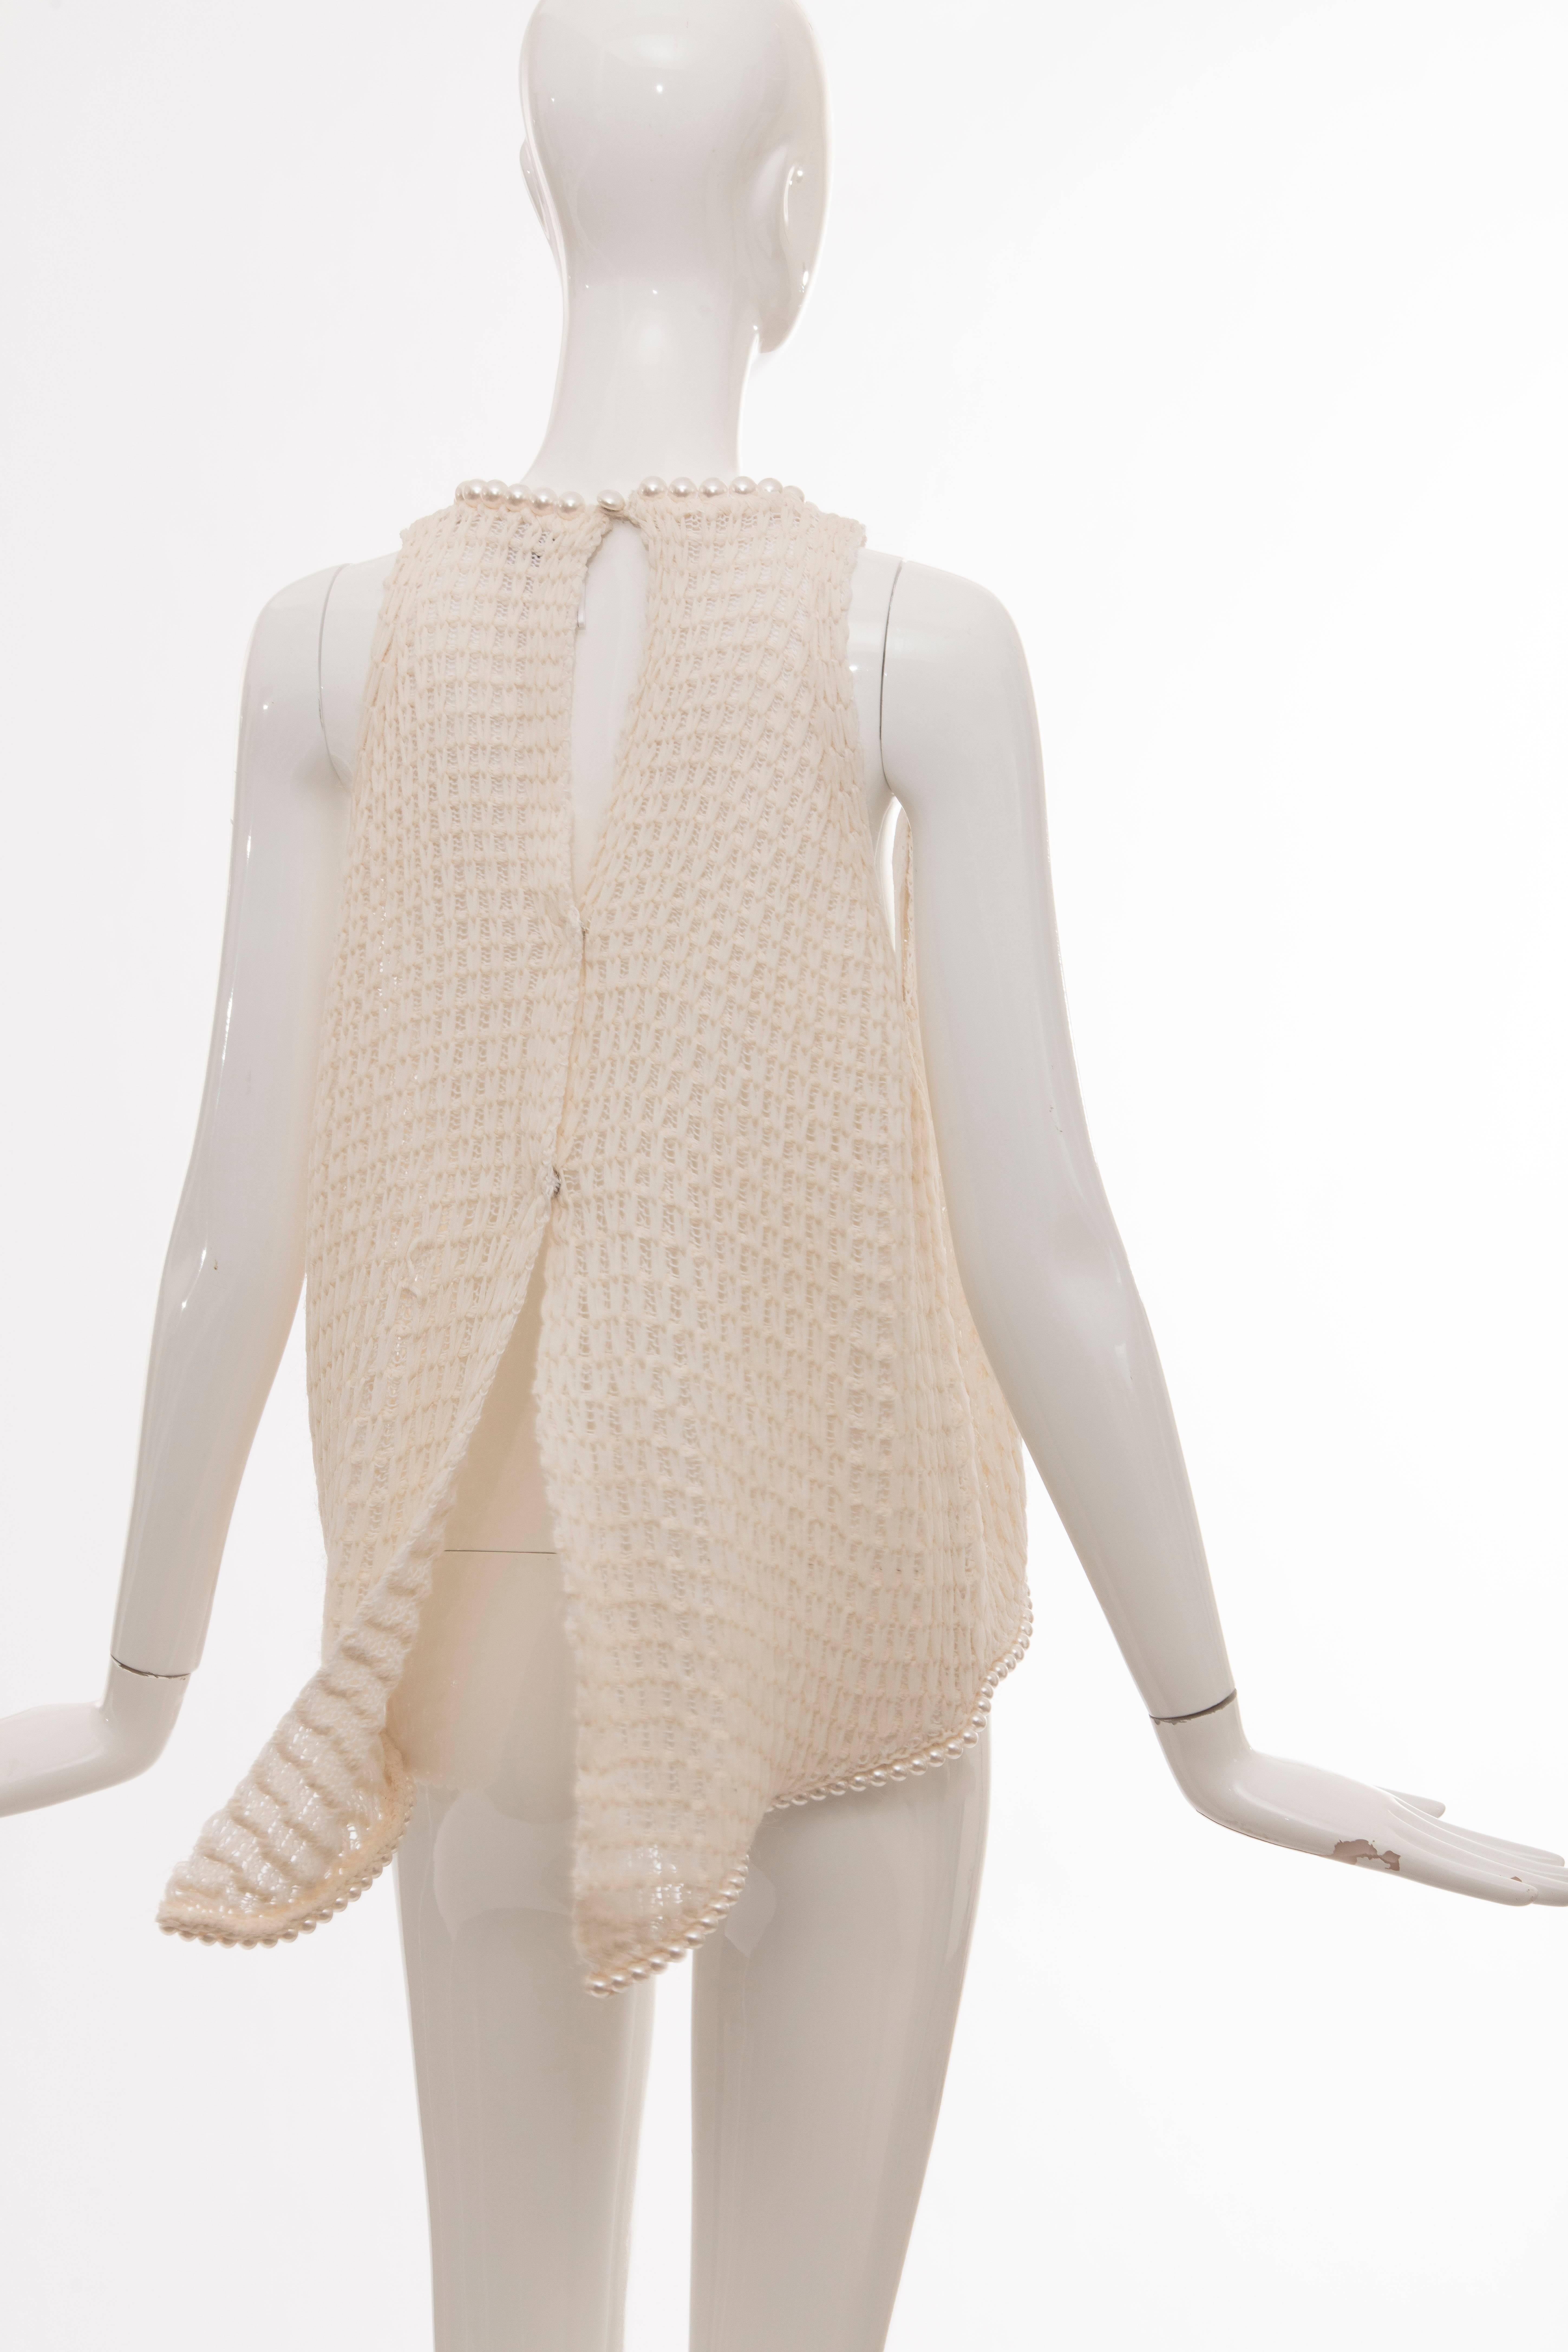 Chanel Cream Silk Blend Open Knit Top With Pearl Embellishments, Spring 2009 For Sale 1